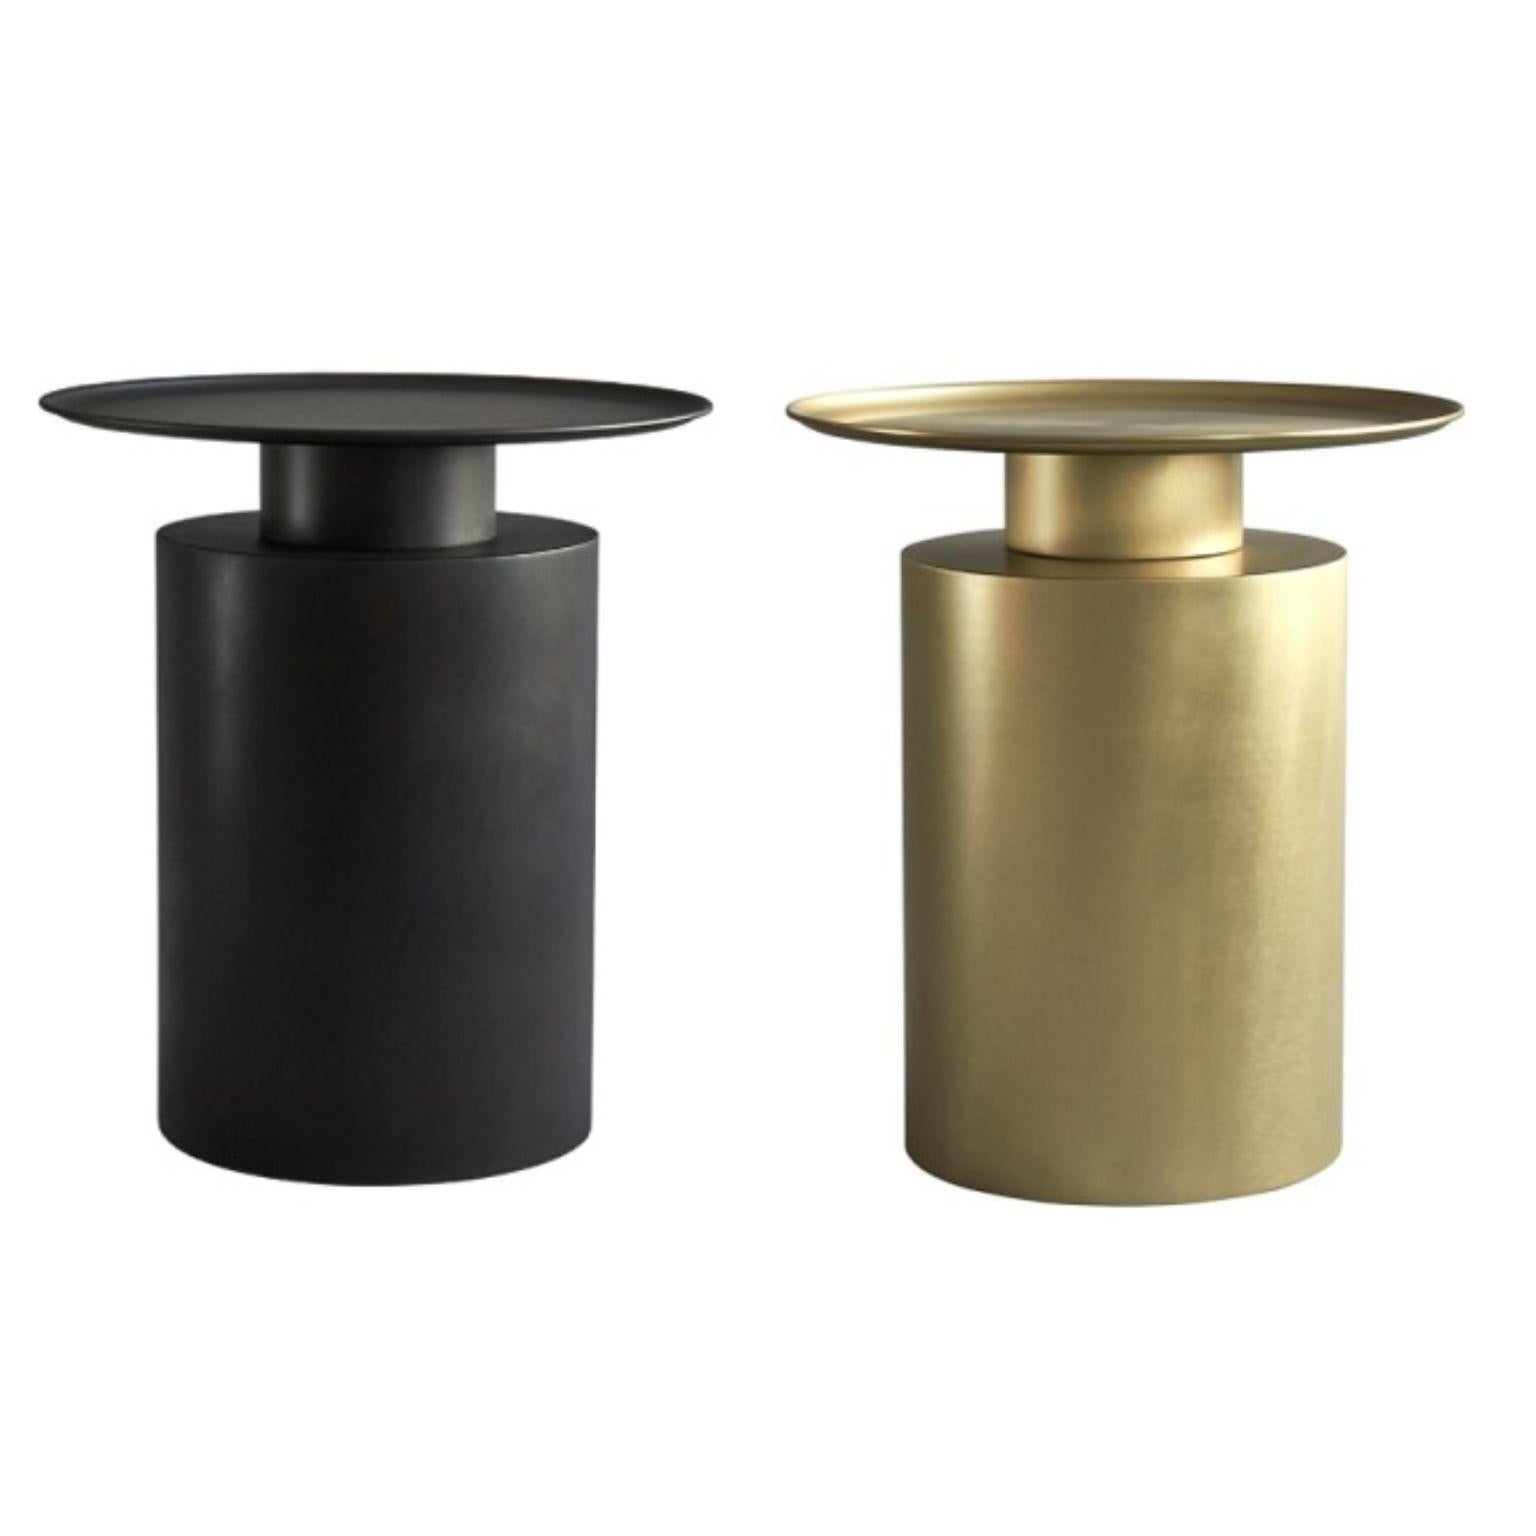 Set of 2 Pillar tables tall by 101 Copenhagen
Designed by Kristian Sofus Hansen & Tommy Hyldahl
Dimensions: L 45 / W 45 /H 50 CM
Materials: Plated Metal

Pillar is inspired by the rich lustrous use of material in the 1930´s Art Deco movement. The